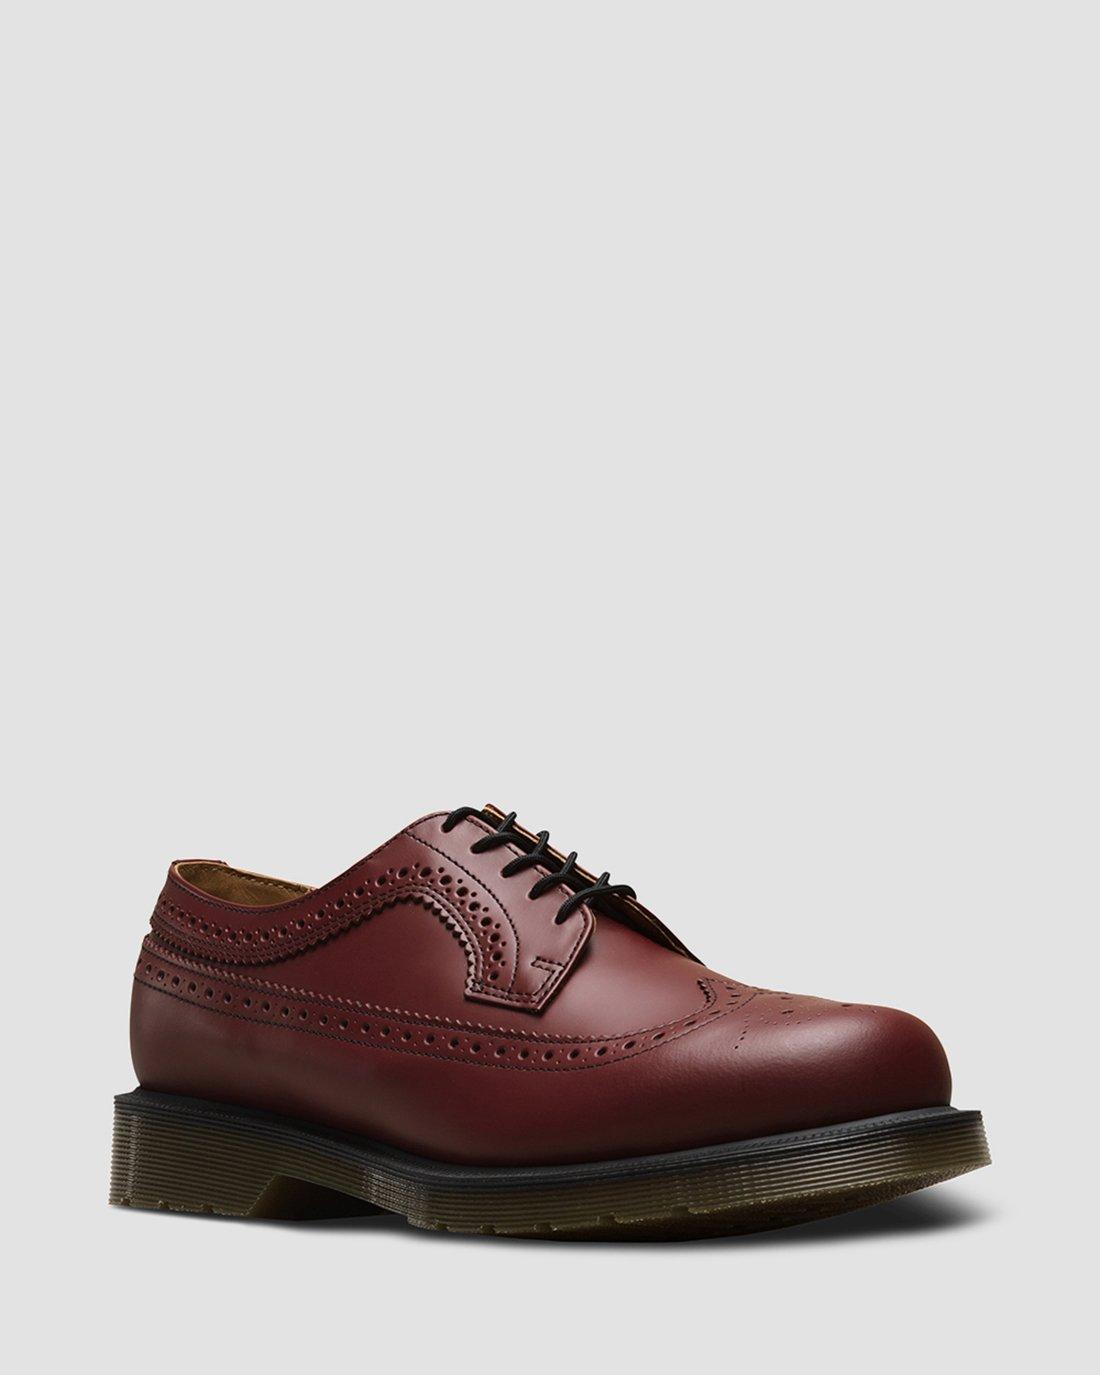 3989 Smooth Leather Brogue Shoes in Cherry Red